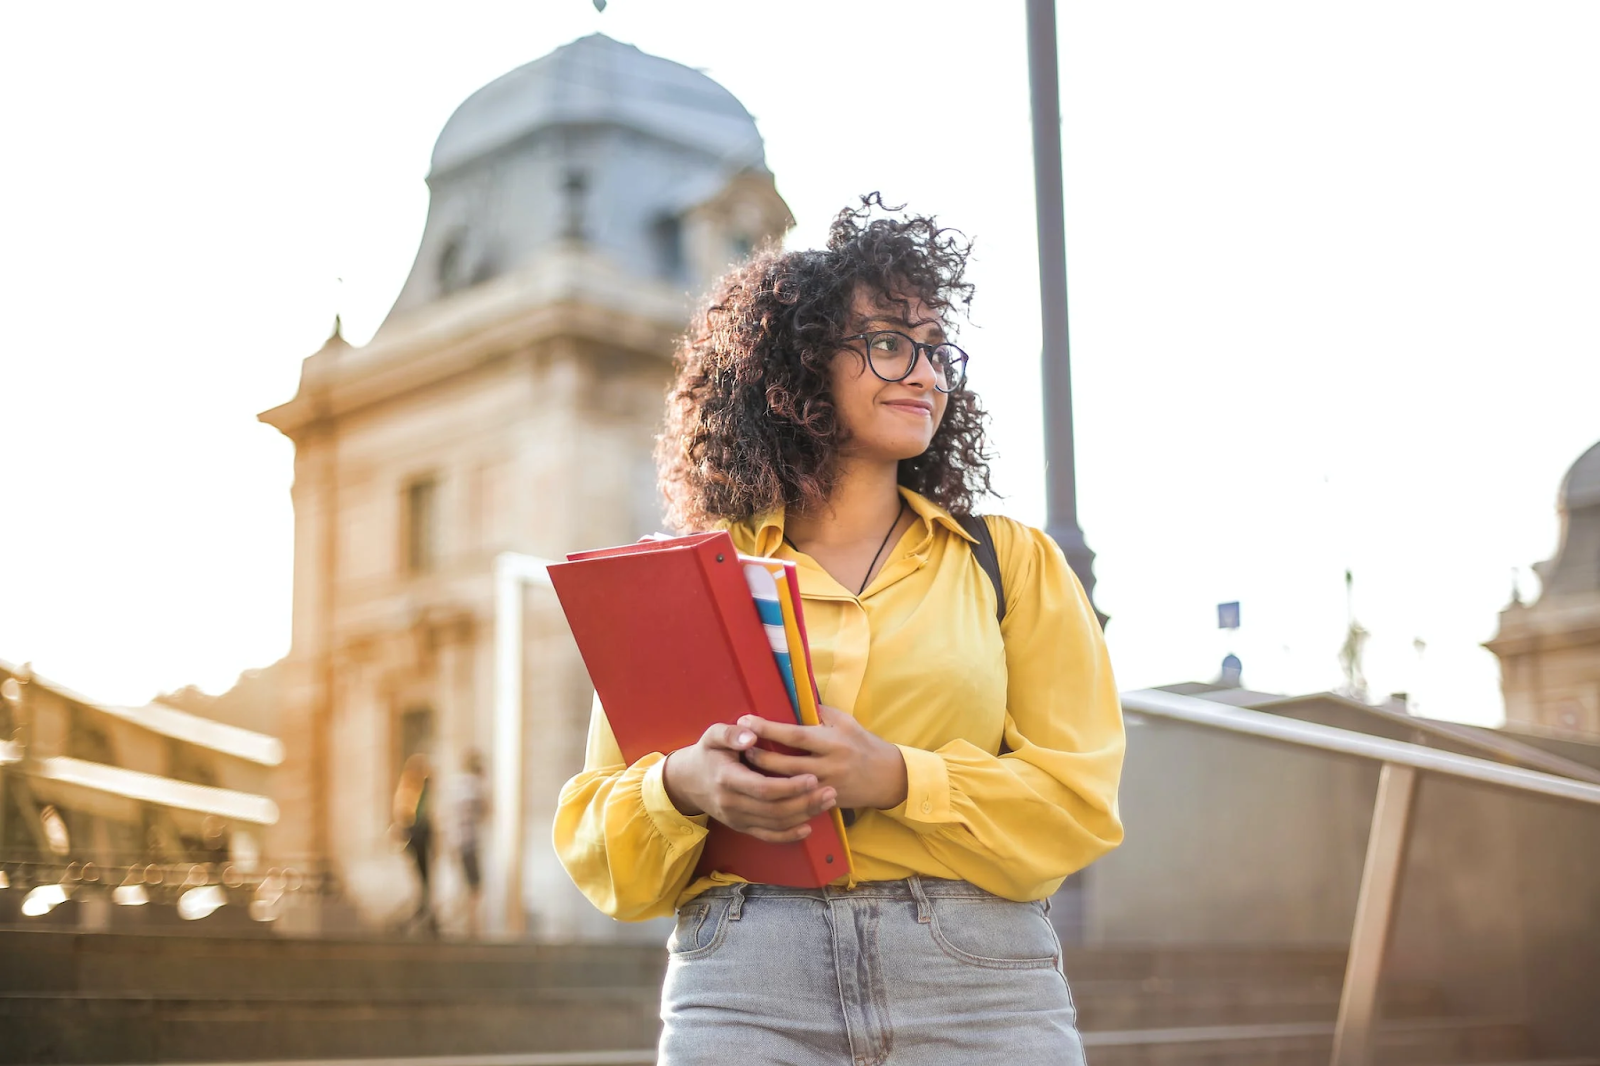 Girl with glasses and a yellow shirt holding books, smiling in front of a building - 10 Things to Complete in Your First Term of College